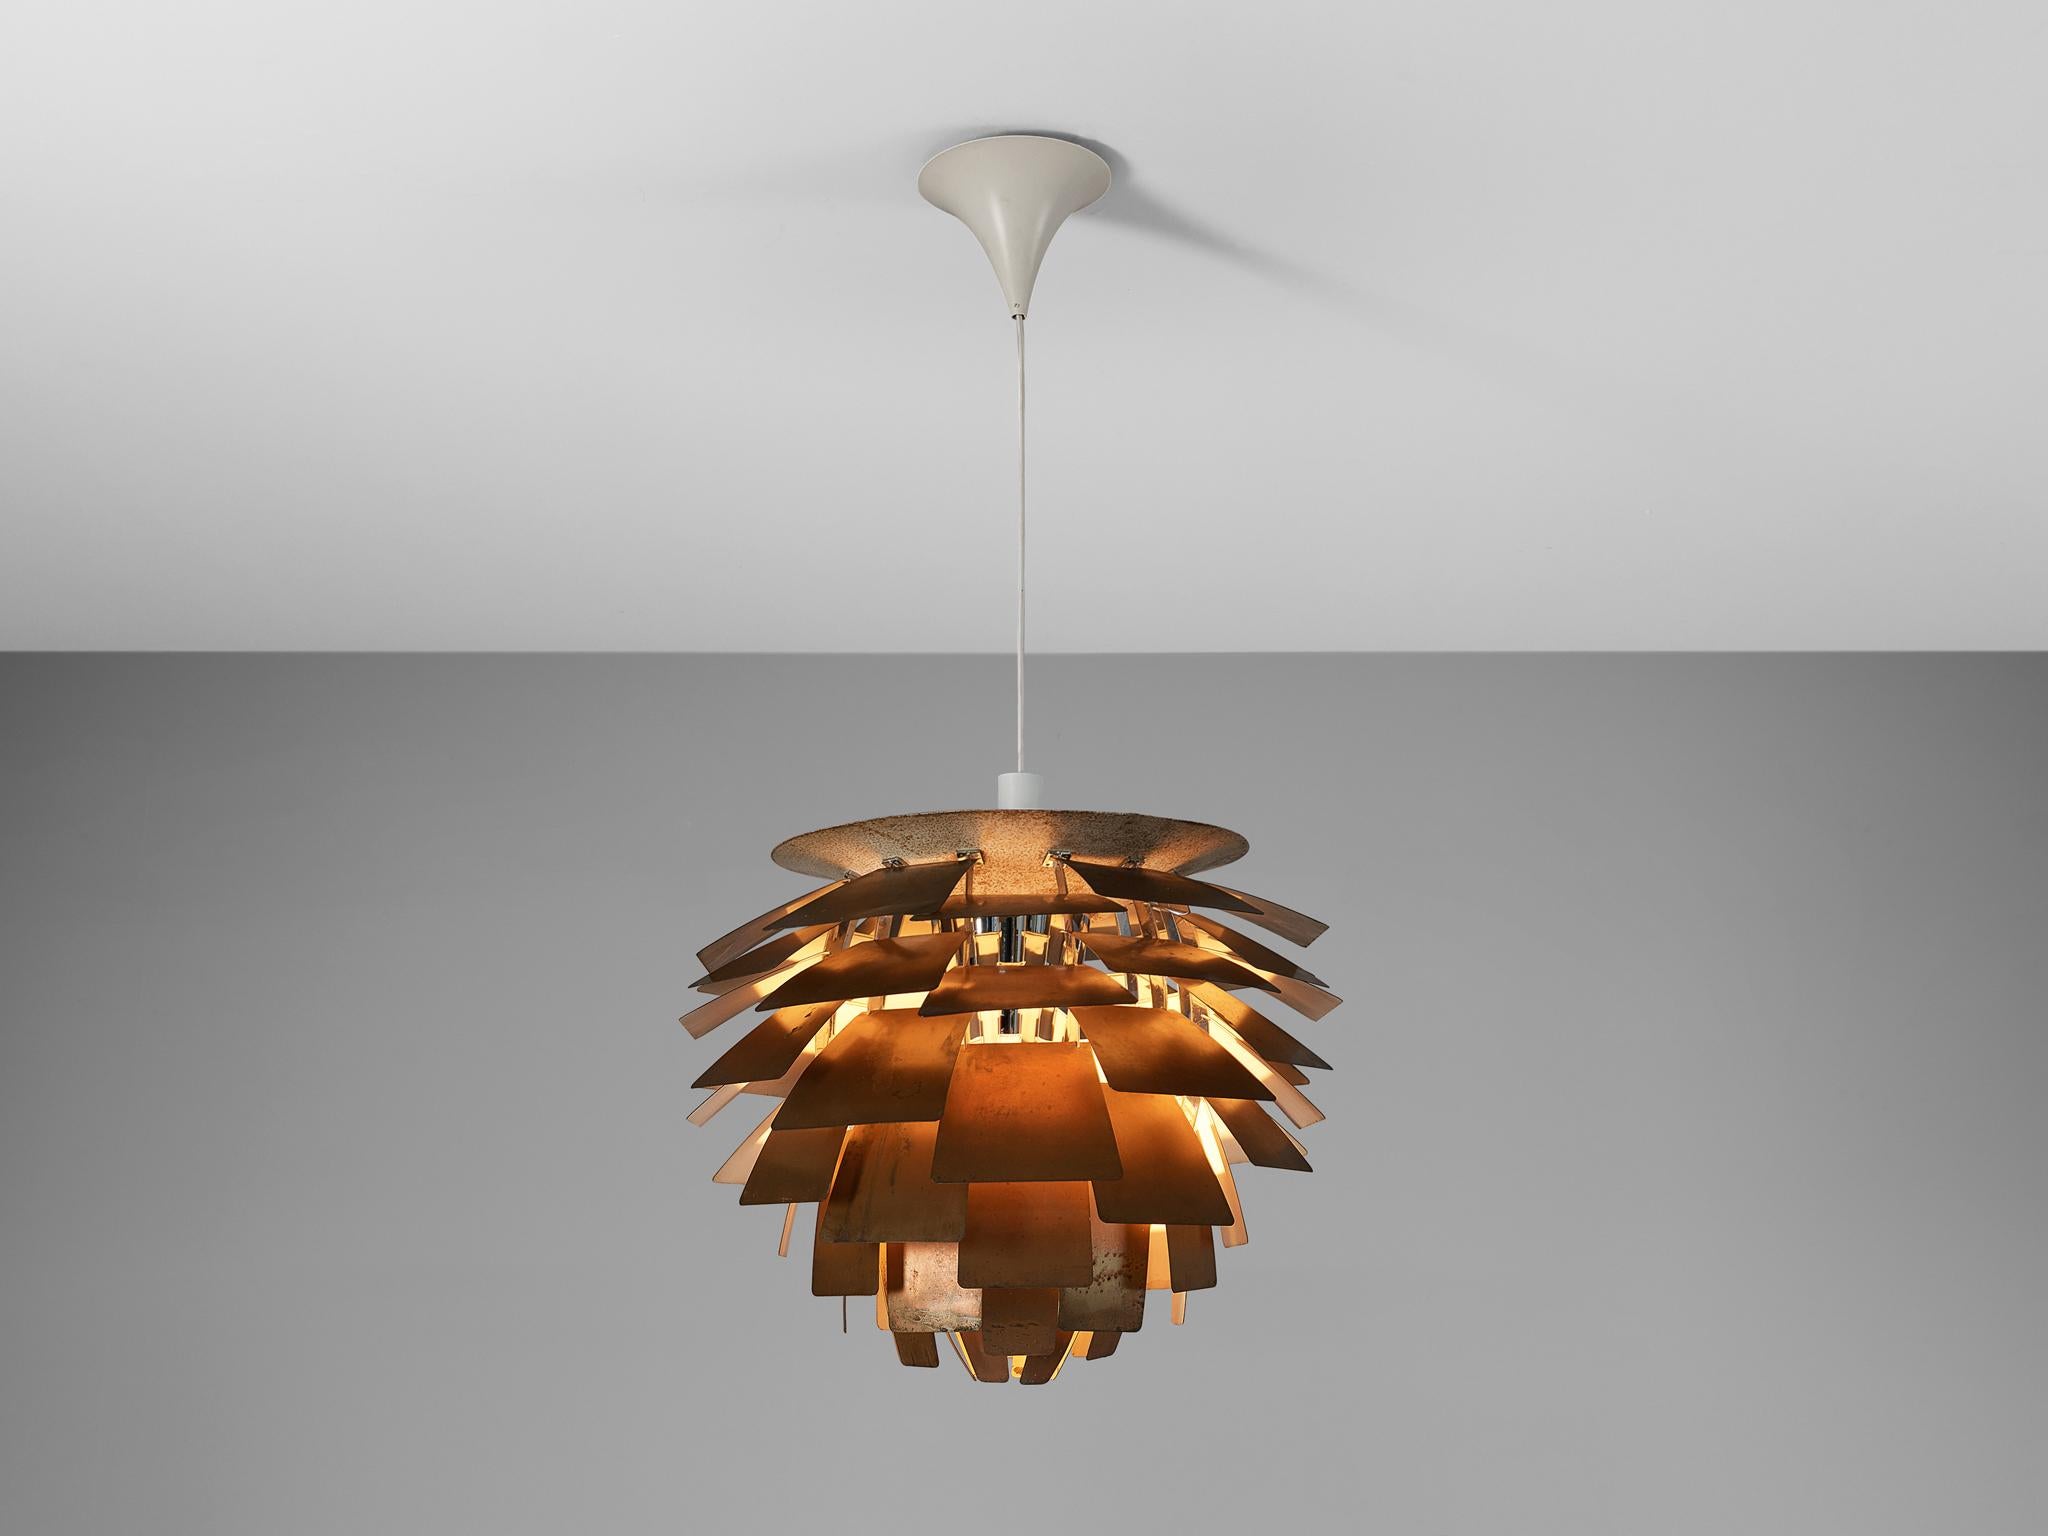 Poul Henningsen for Louis Poulsen, 'PH-Artichoke' pendant, patinated copper, design 1957, manufactured 1950s, Denmark. 

The 'Artichoke' pendant is an all time eyecatcher in the lighting design. This iconic pendant, designed by Poul Henningsen,